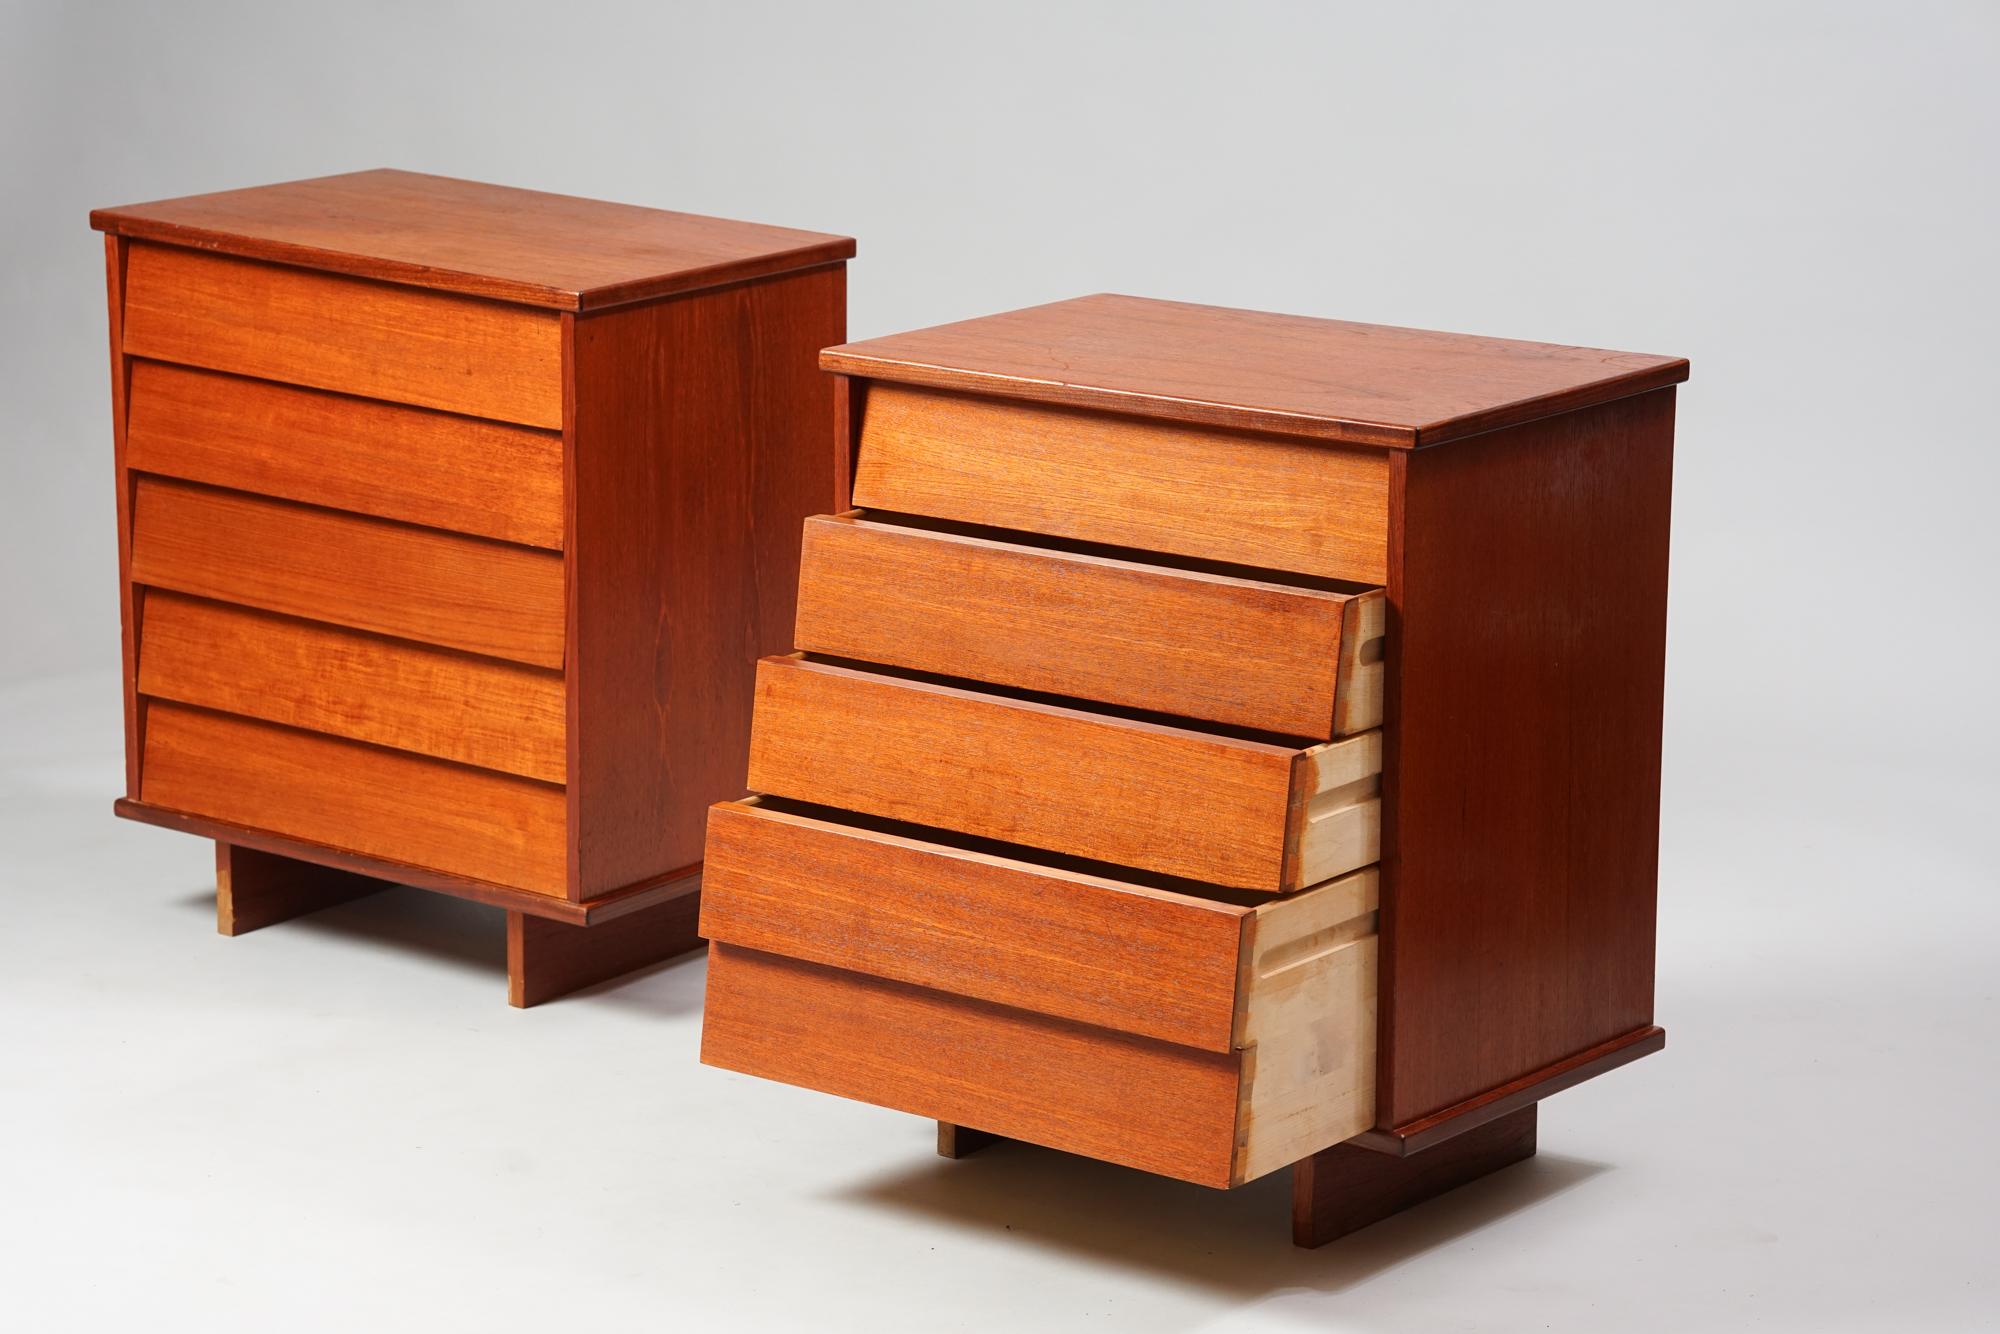 Set of two chest of drawers by Ilmari Tapiovaara for Asko, 1960s. Teak. Good vintage condition, patina and wear consistent with age and use. The drawers are sold together. 

Yrjö Ilmari Tapiovaara was one of the most important Finnish designers and